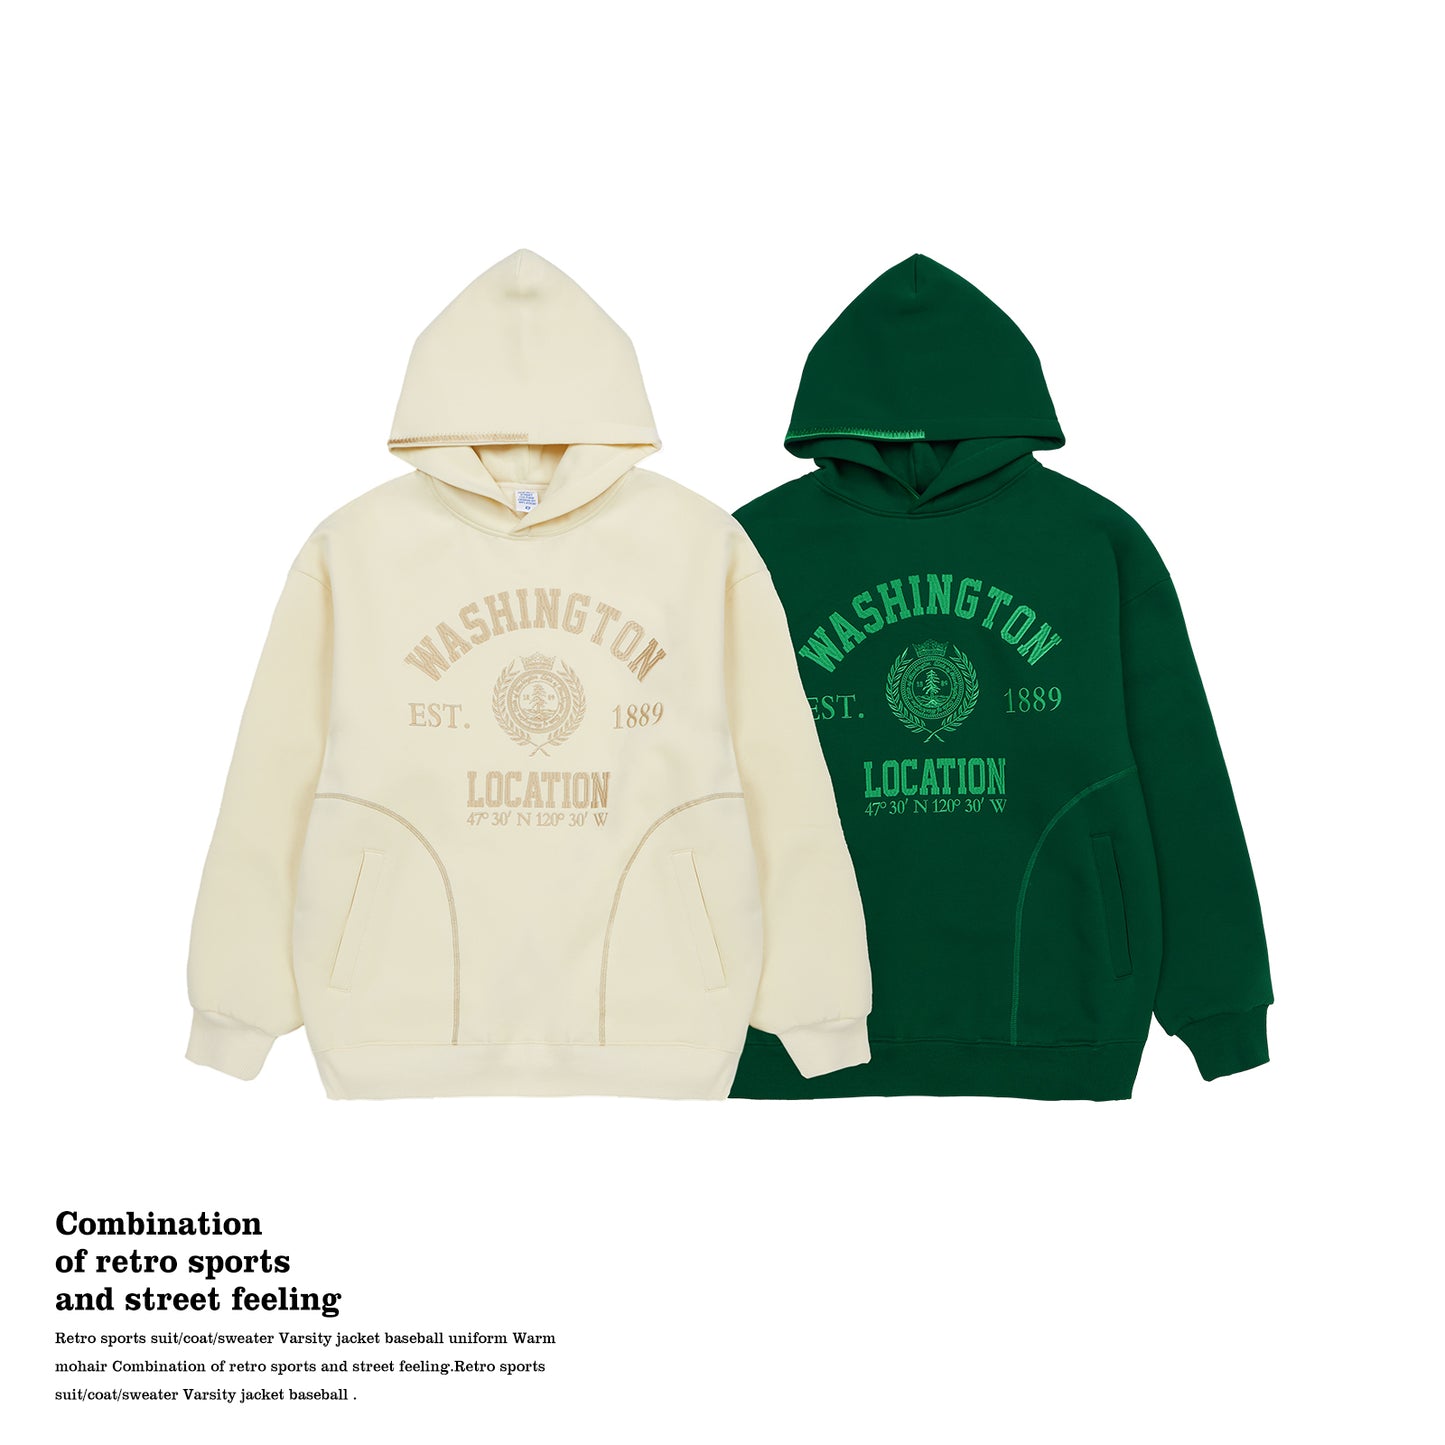 "EMBROIDERED" HOODIE